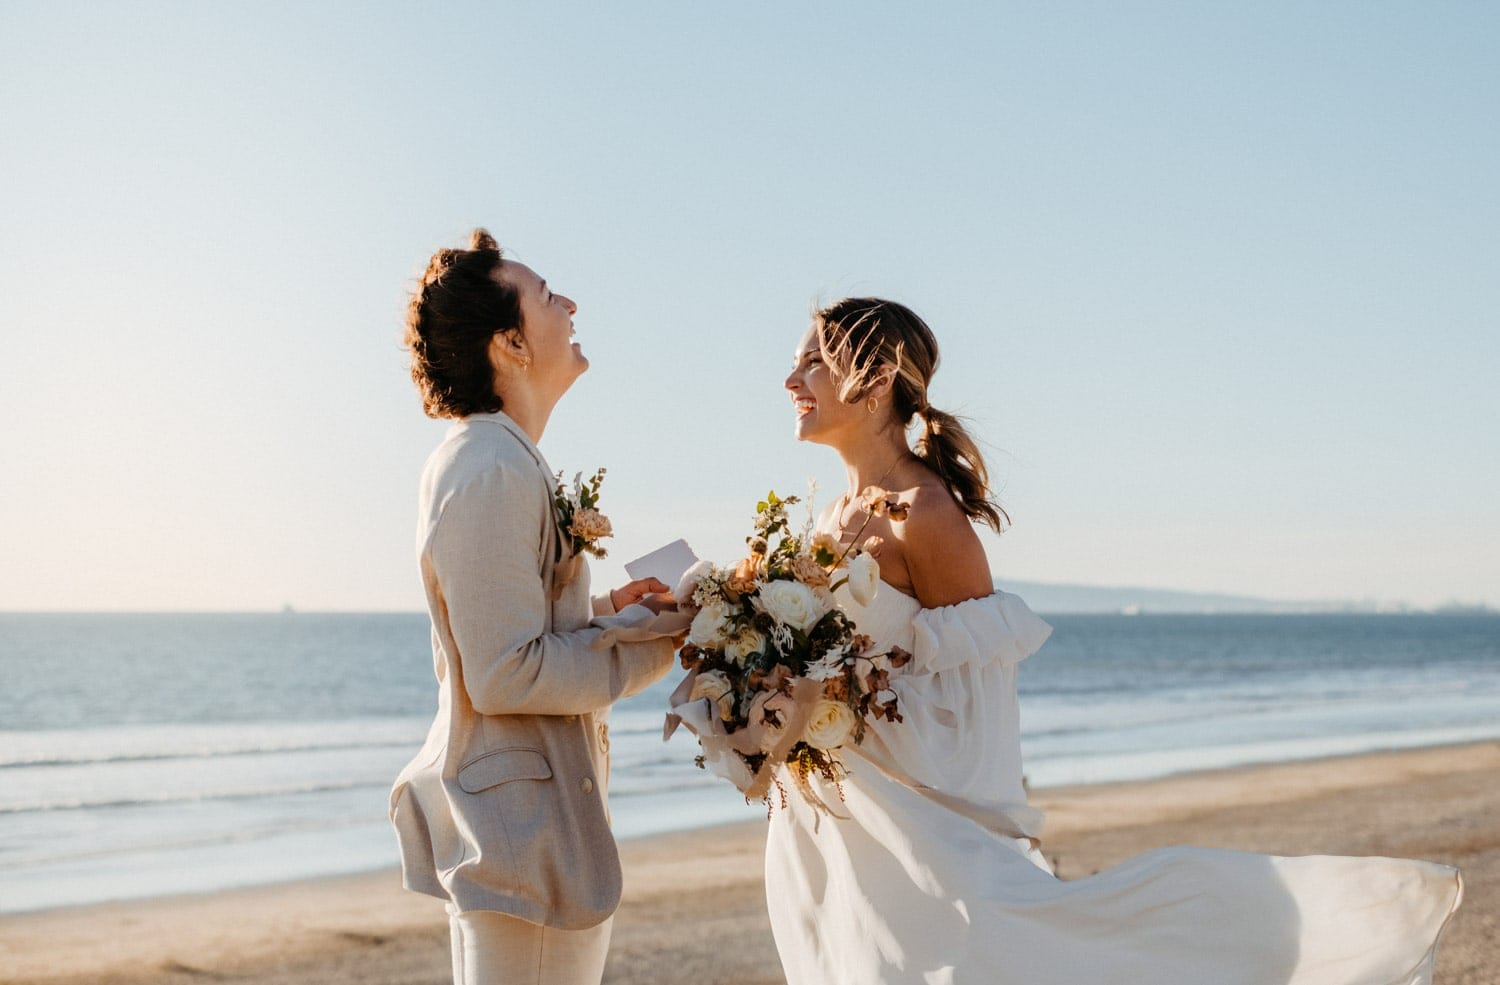 Two brides are laughing together on a beach, with the bride holding a bouquet and her dress blowing in the wind.